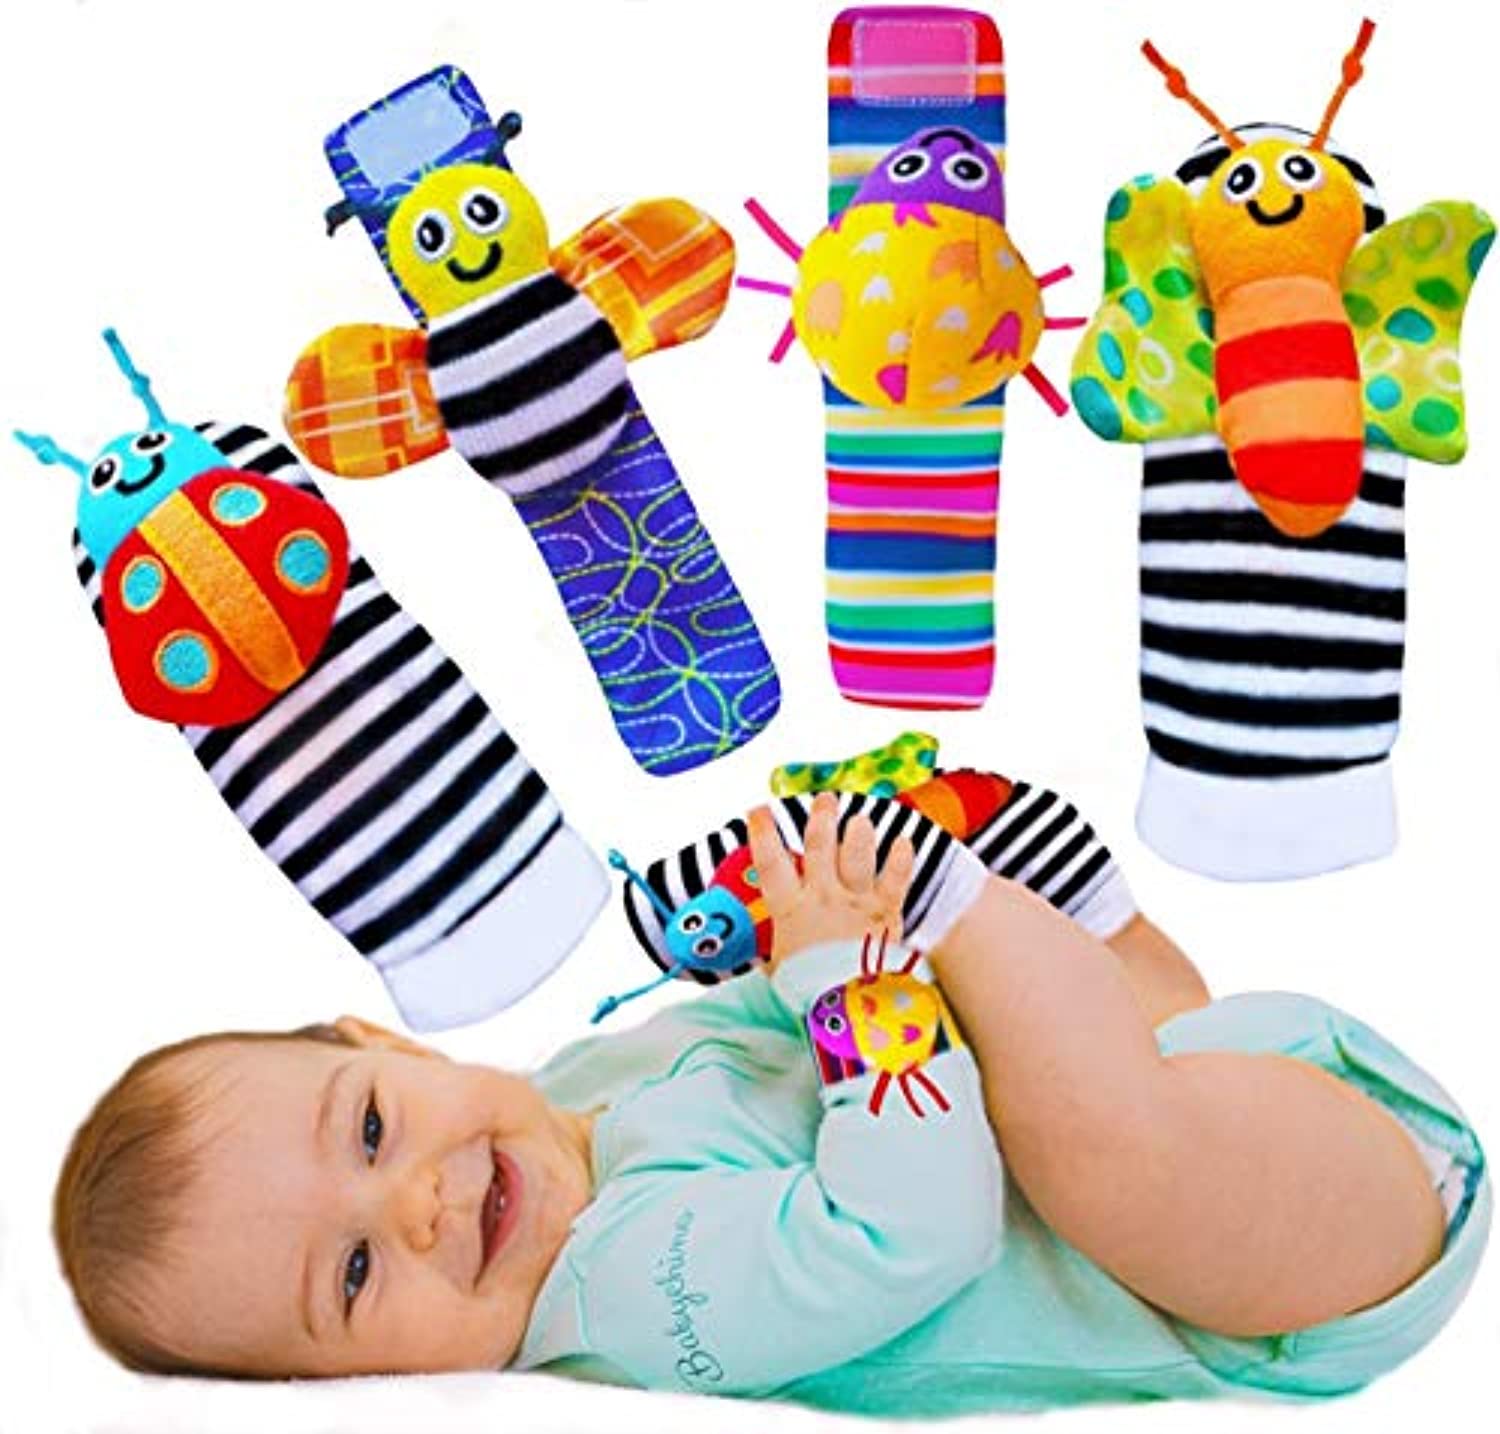 Baby Wrist Rattle & Foot Finder Socks - Infant Developmental Sensory Learning Toys for Boys and Girls from 0-3-6 Months Old